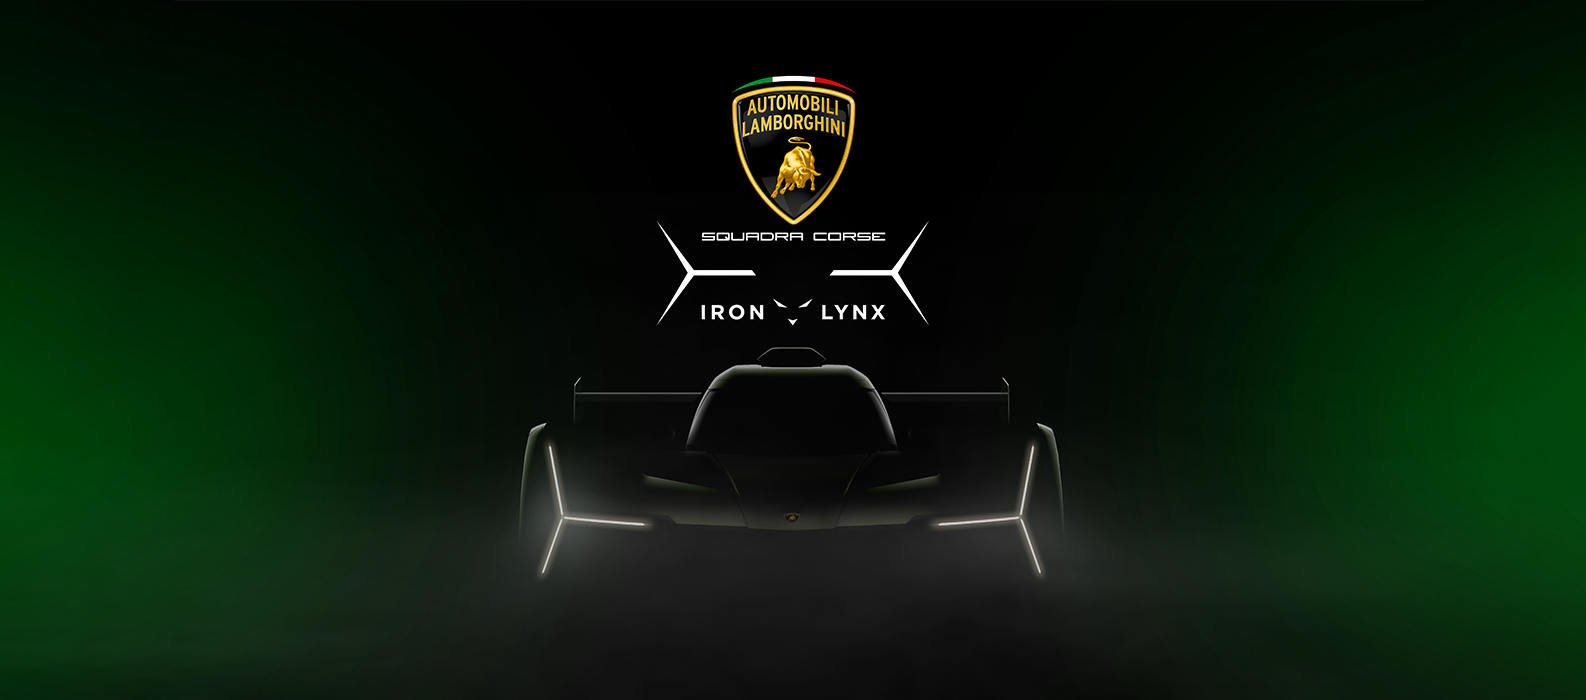 Lamborghini and Iron Lynx join forces for LMDh programme in FIA WEC and